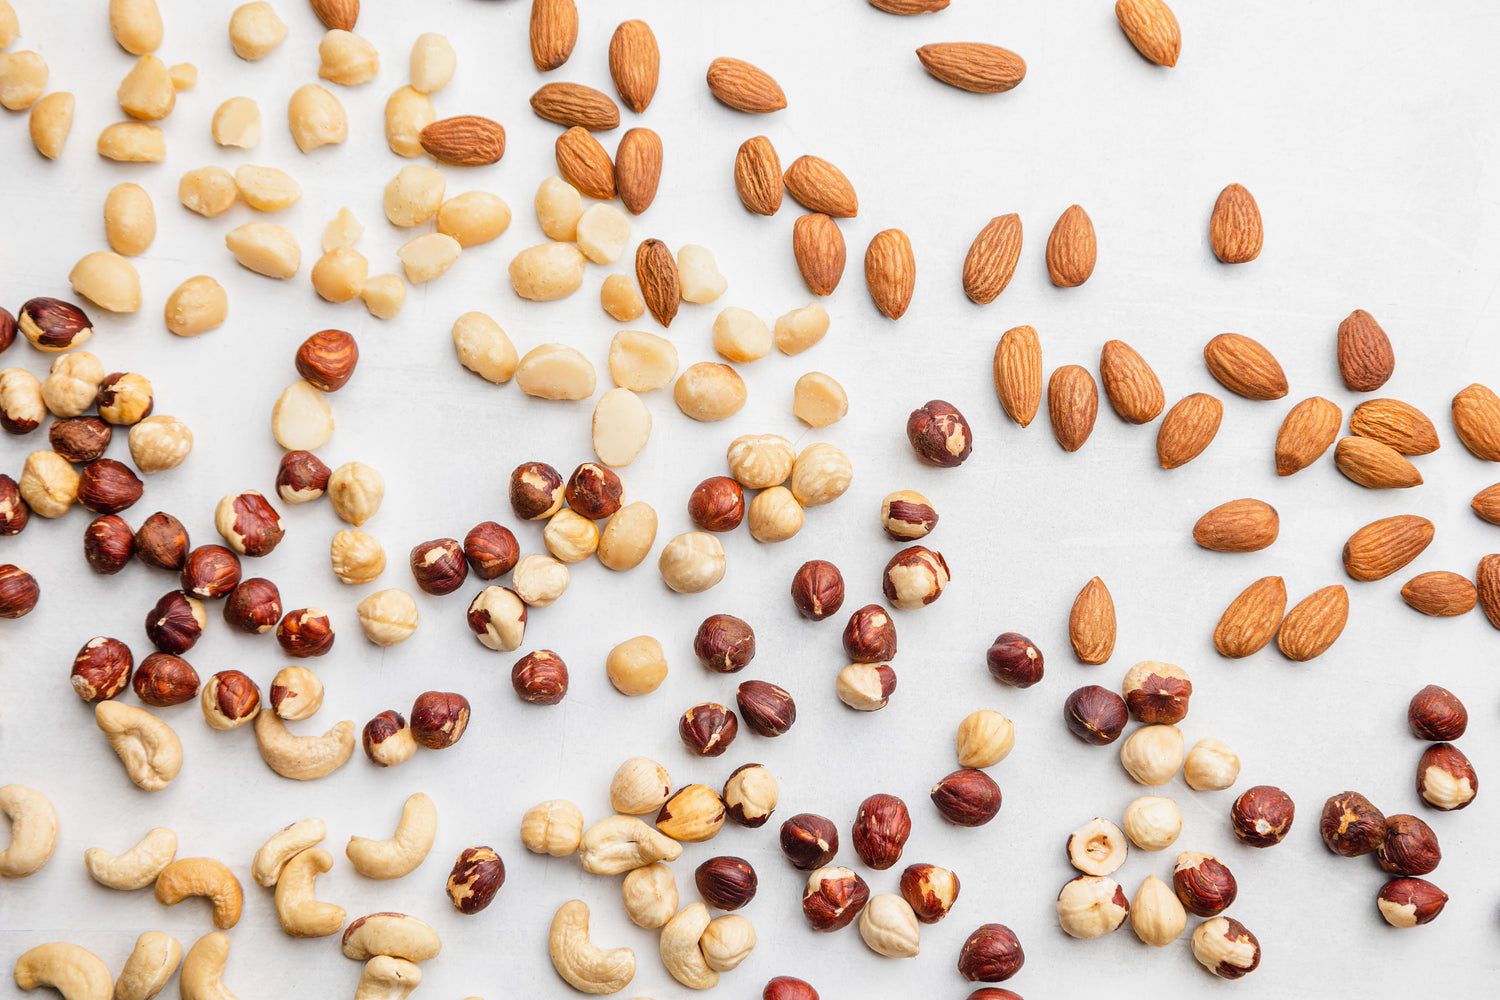 Dispelling Common Nutrition Myths about Nuts